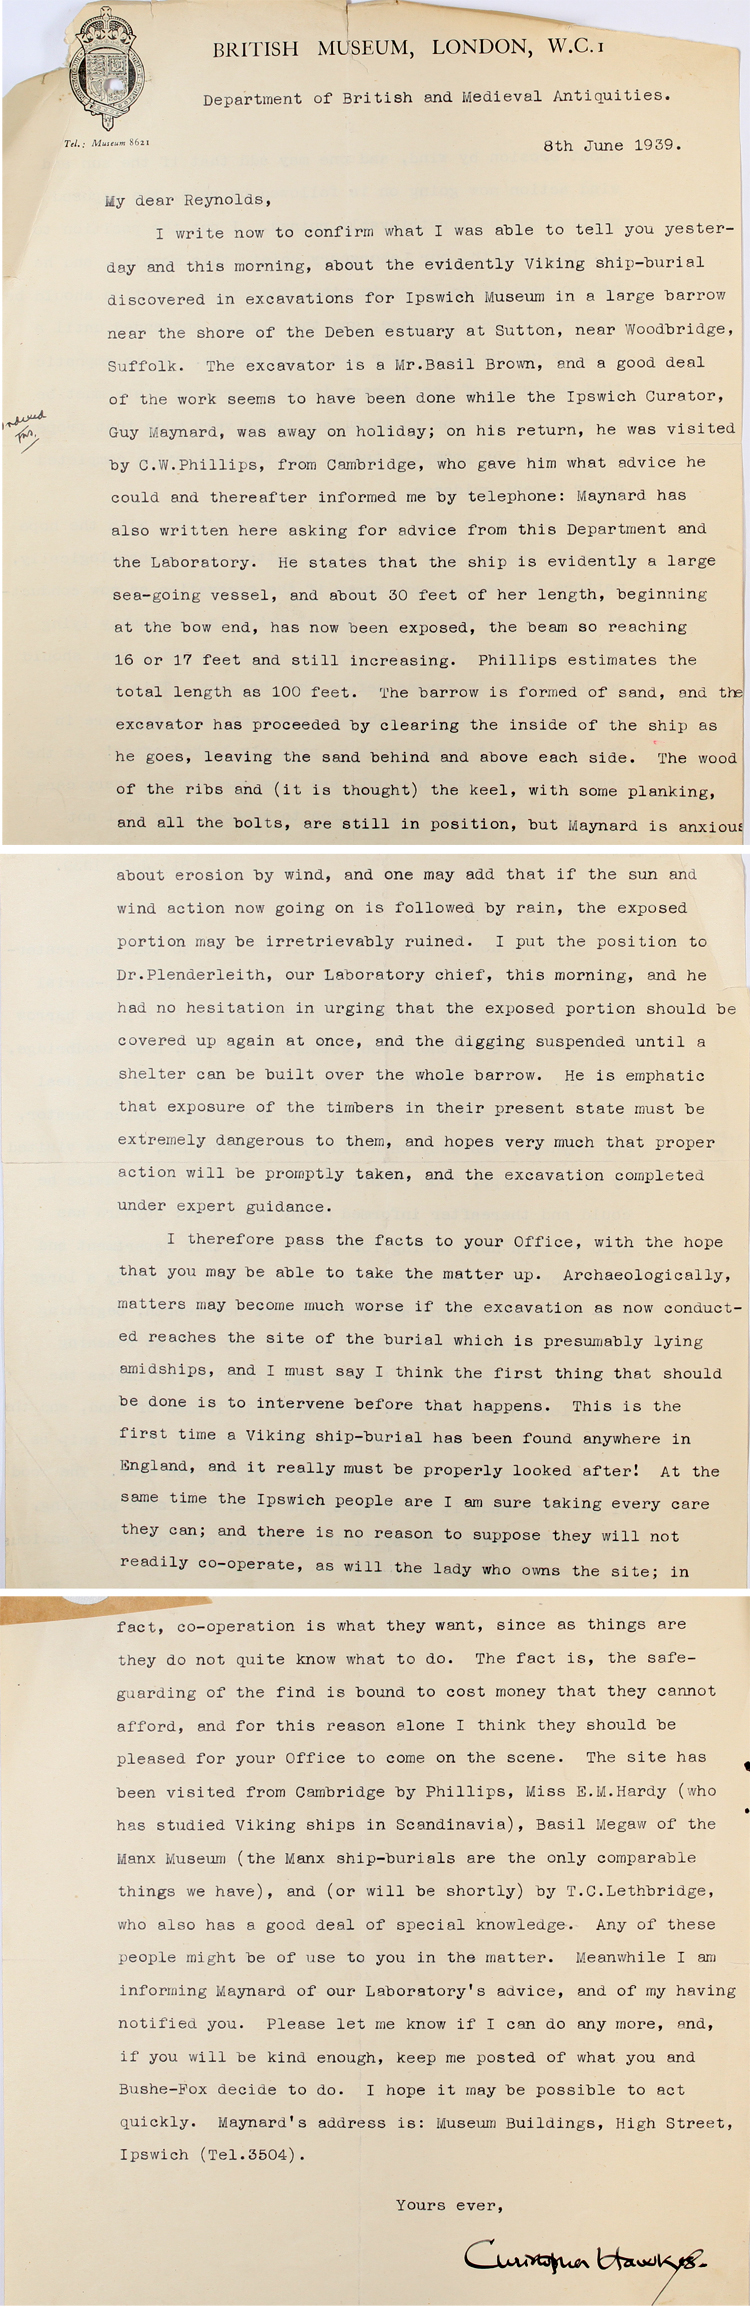 Letter from an official at the Department of British Medieval Antiquities at the British Museum to the Inspector of Ancient Monuments, 8th June 1939 (WORK 14/2146)